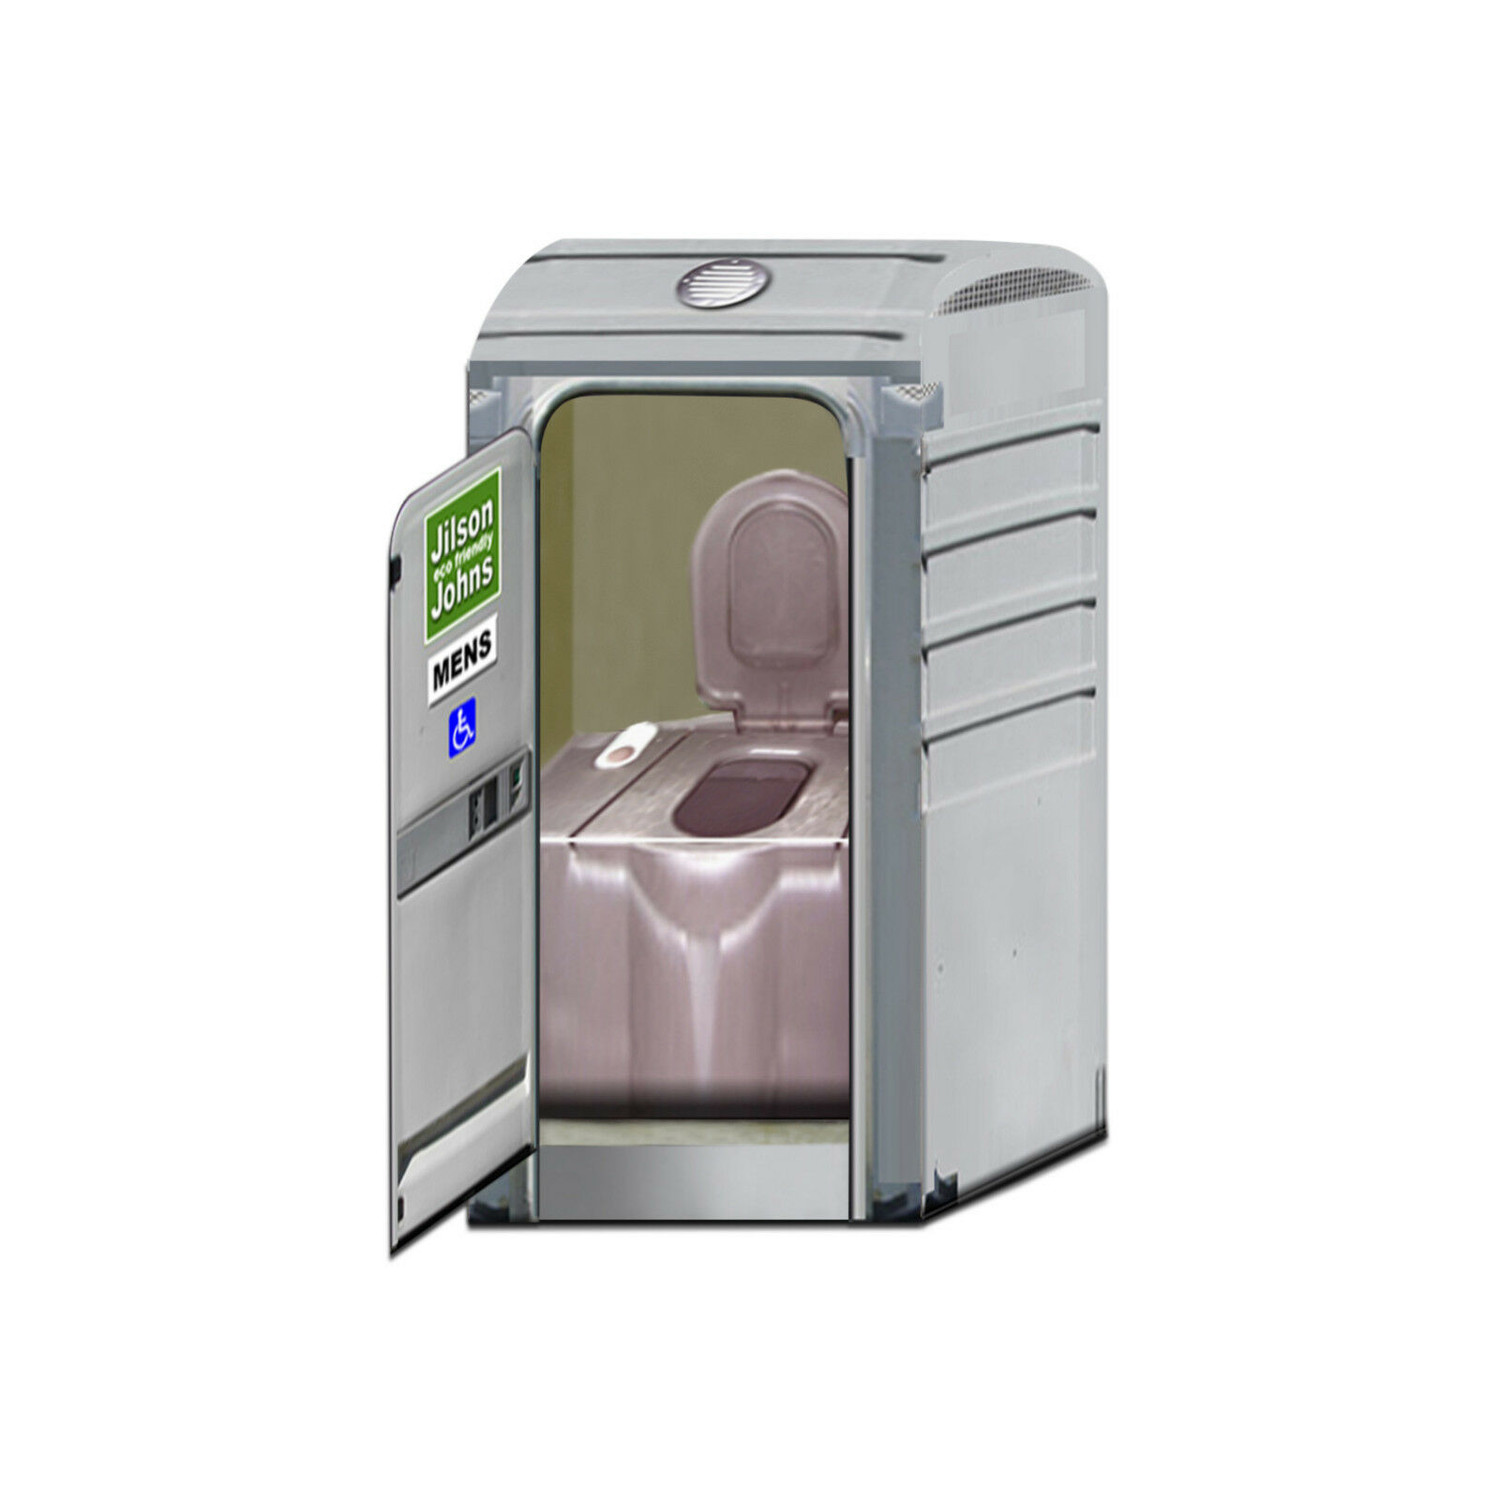 BK 6430 1/64 Scale Slot Car Photo Real "Porta Potty's, Park Benches, Trash Cans"